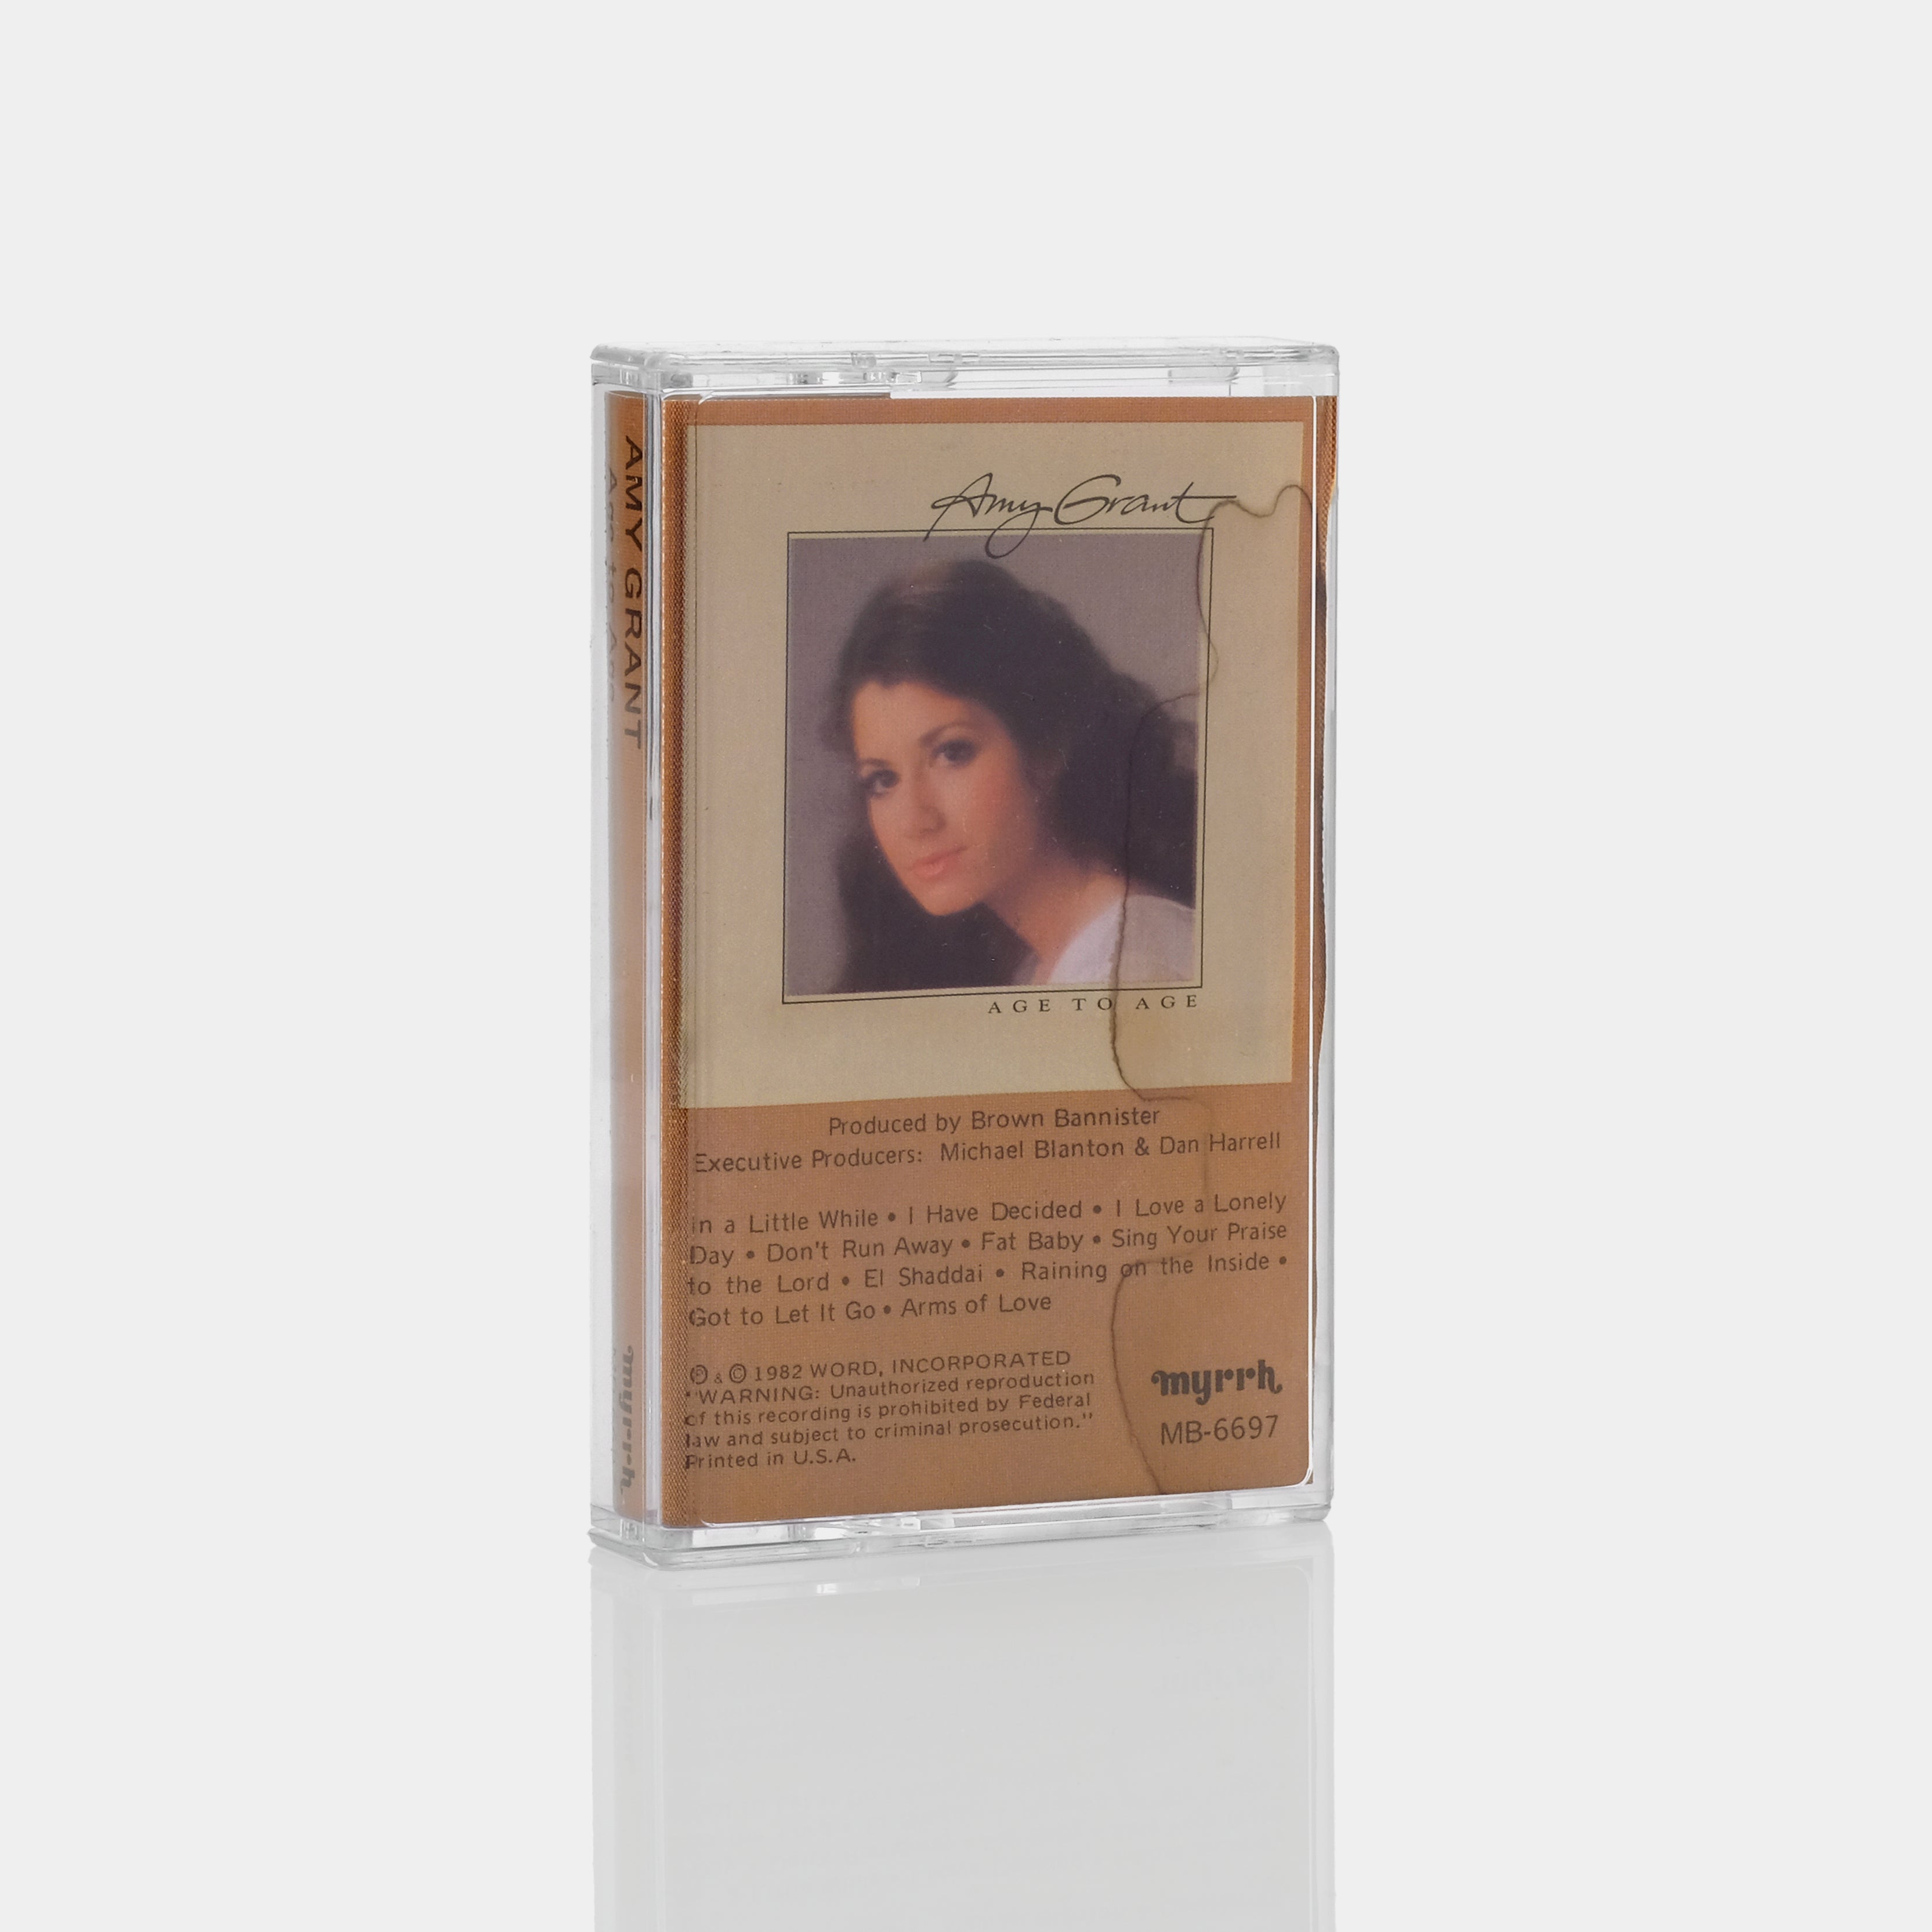 Amy Grant - Age To Age Cassette Tape